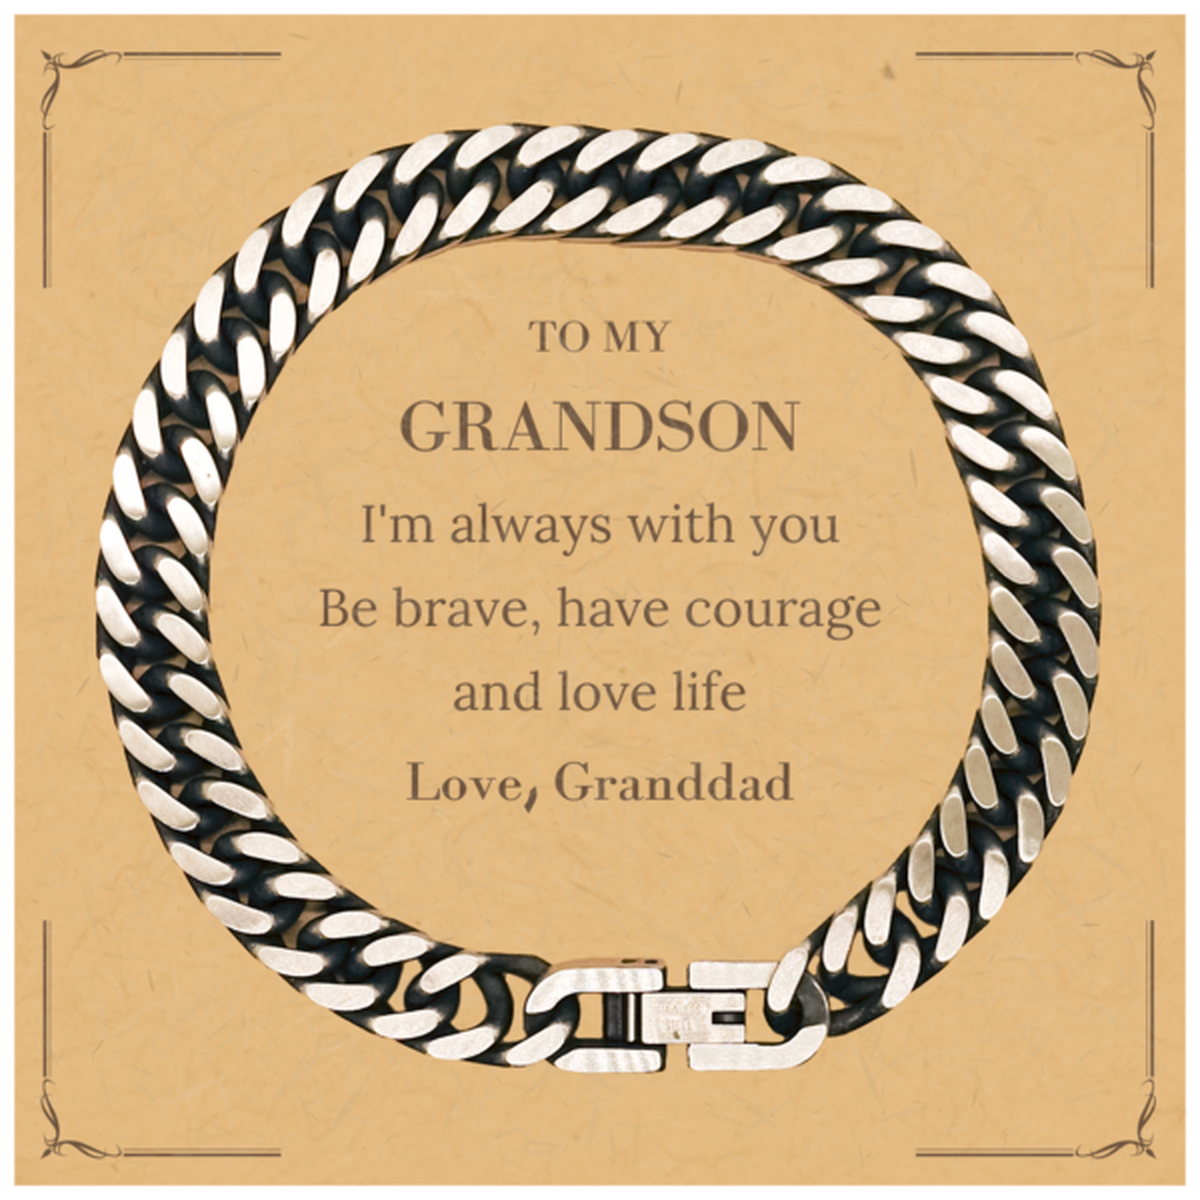 To My Grandson Gifts from Granddad, Unique Cuban Link Chain Bracelet Inspirational Christmas Birthday Graduation Gifts for Grandson I'm always with you. Be brave, have courage and love life. Love, Granddad